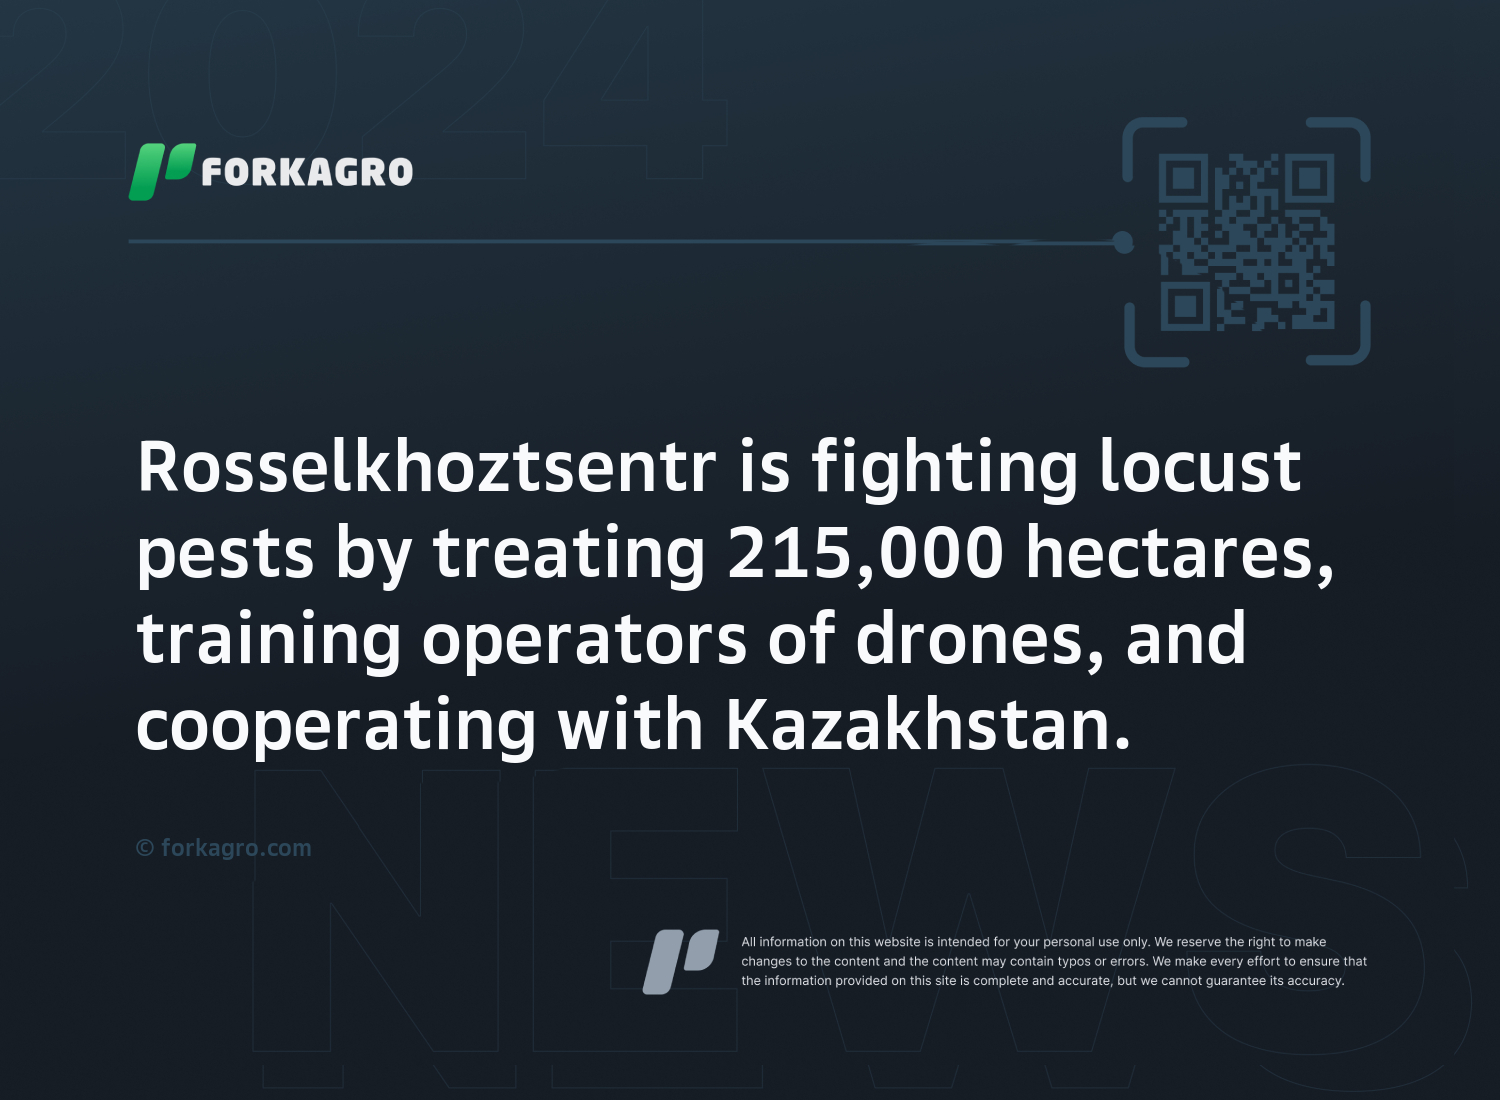 Rosselkhoztsentr is fighting locust pests by treating 215,000 hectares, training operators of drones, and cooperating with Kazakhstan.